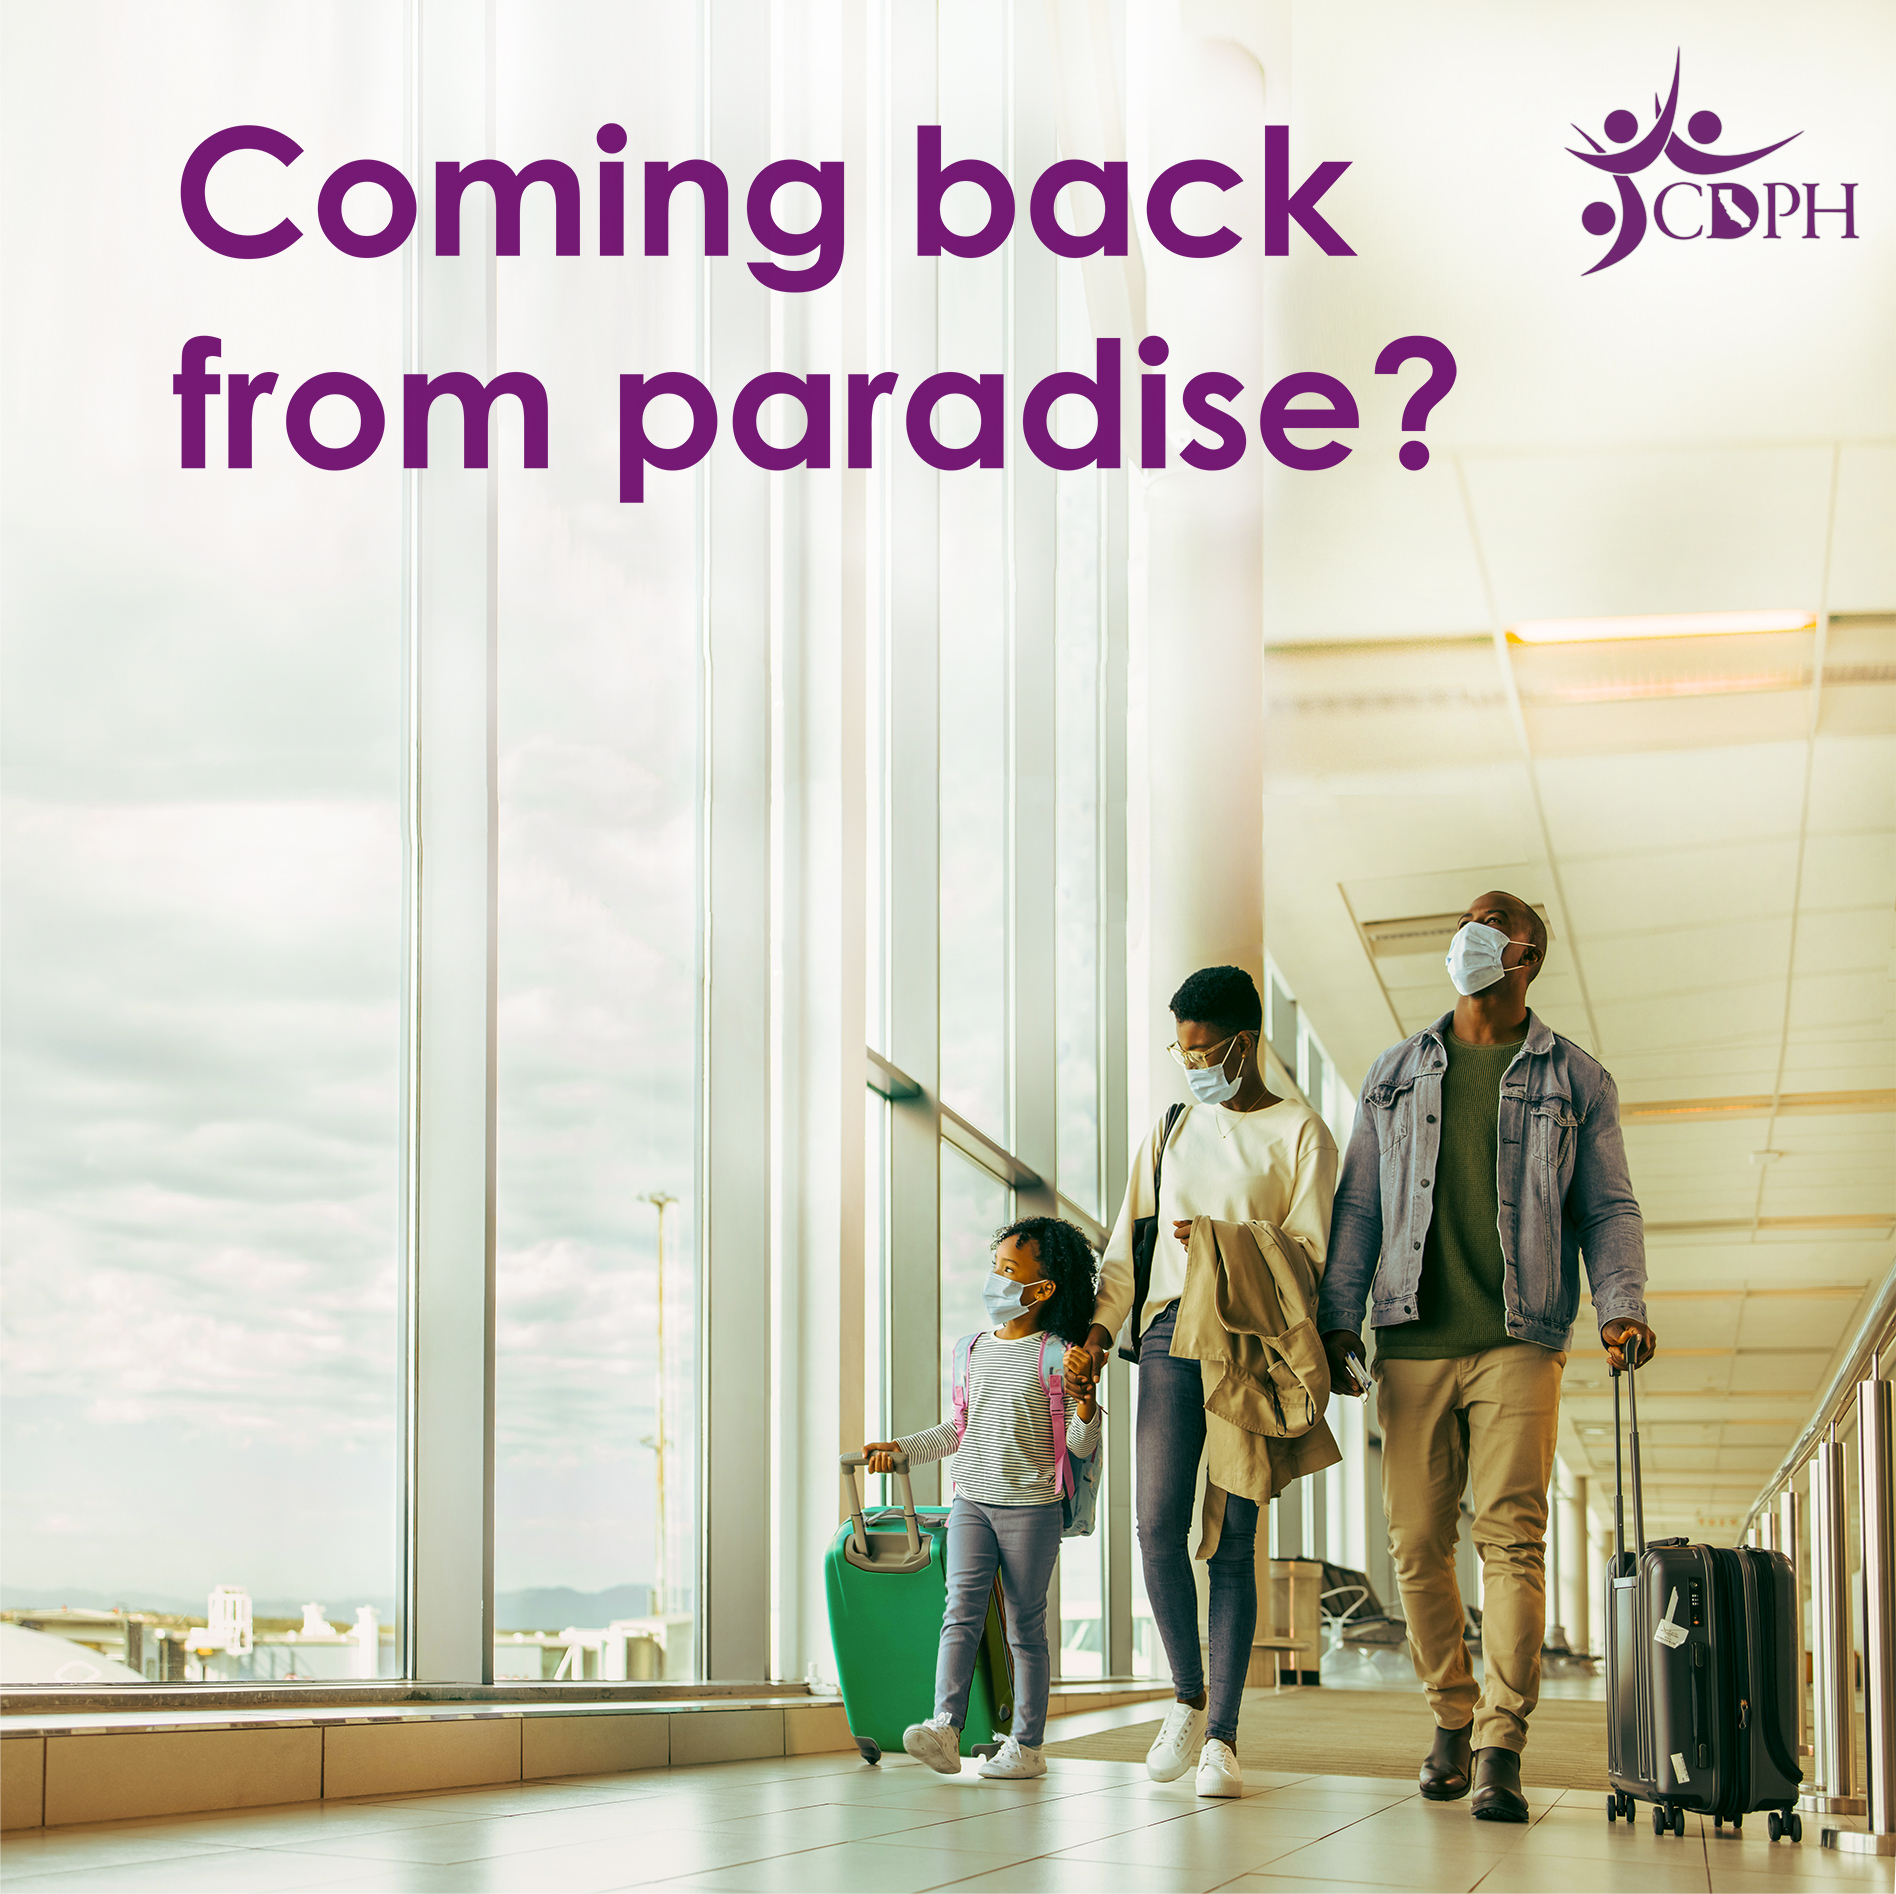 Coming back from paradise?